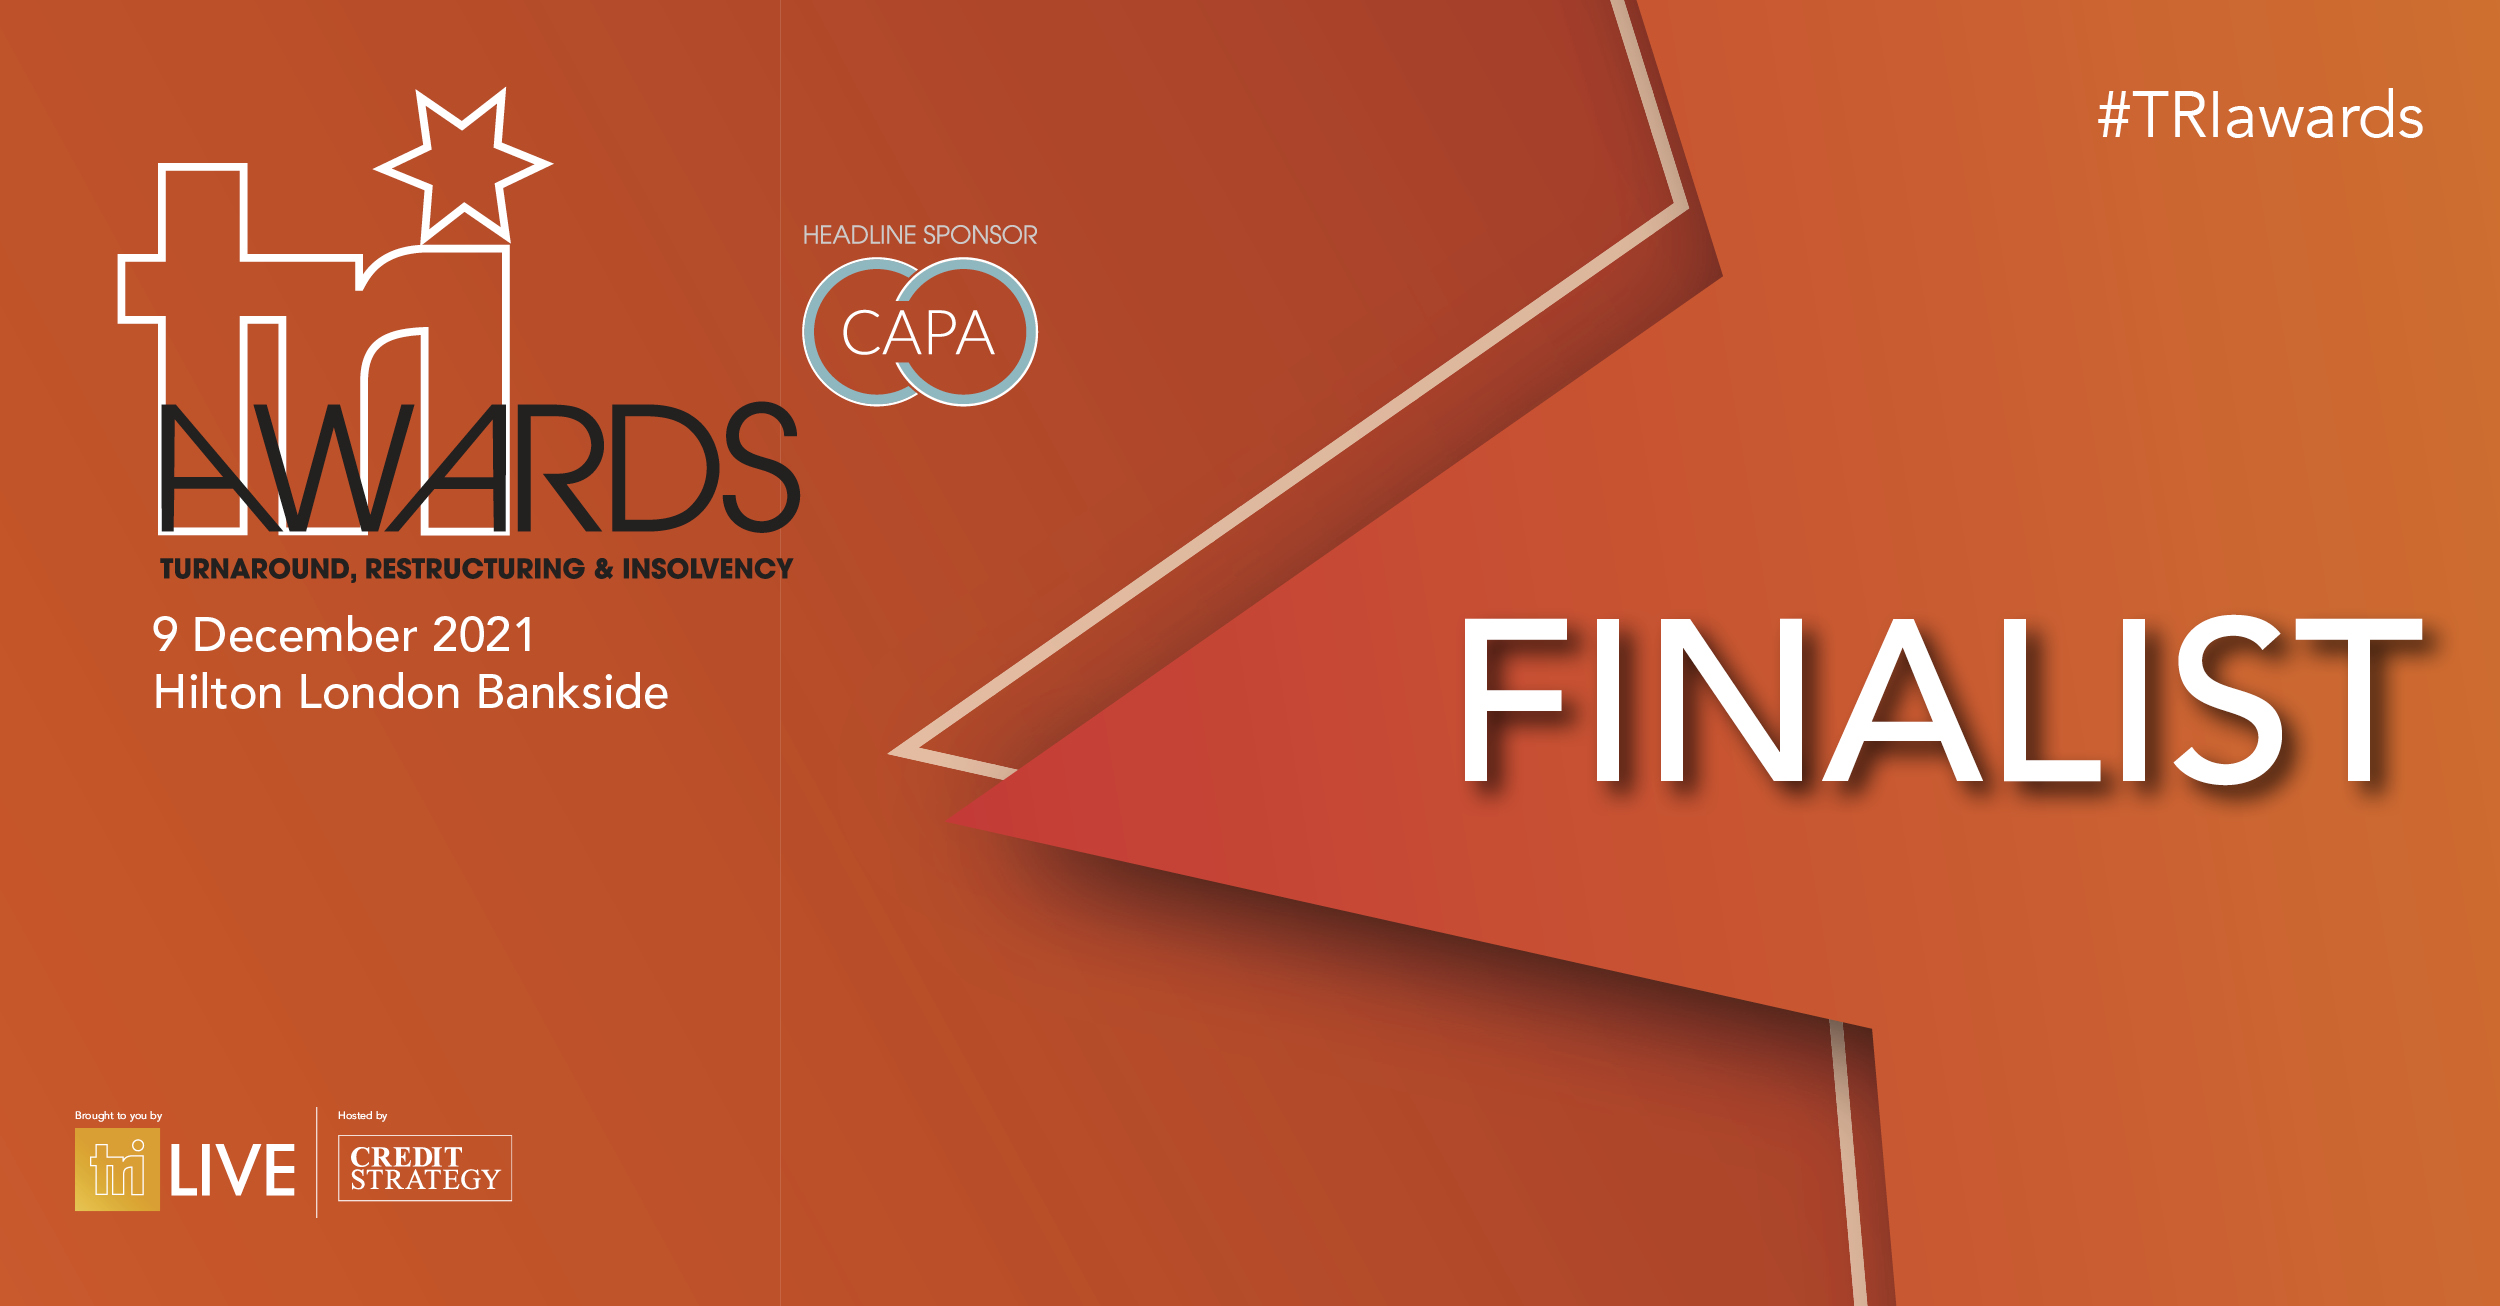 Postworks announced as TRI awards best technology provider finalists